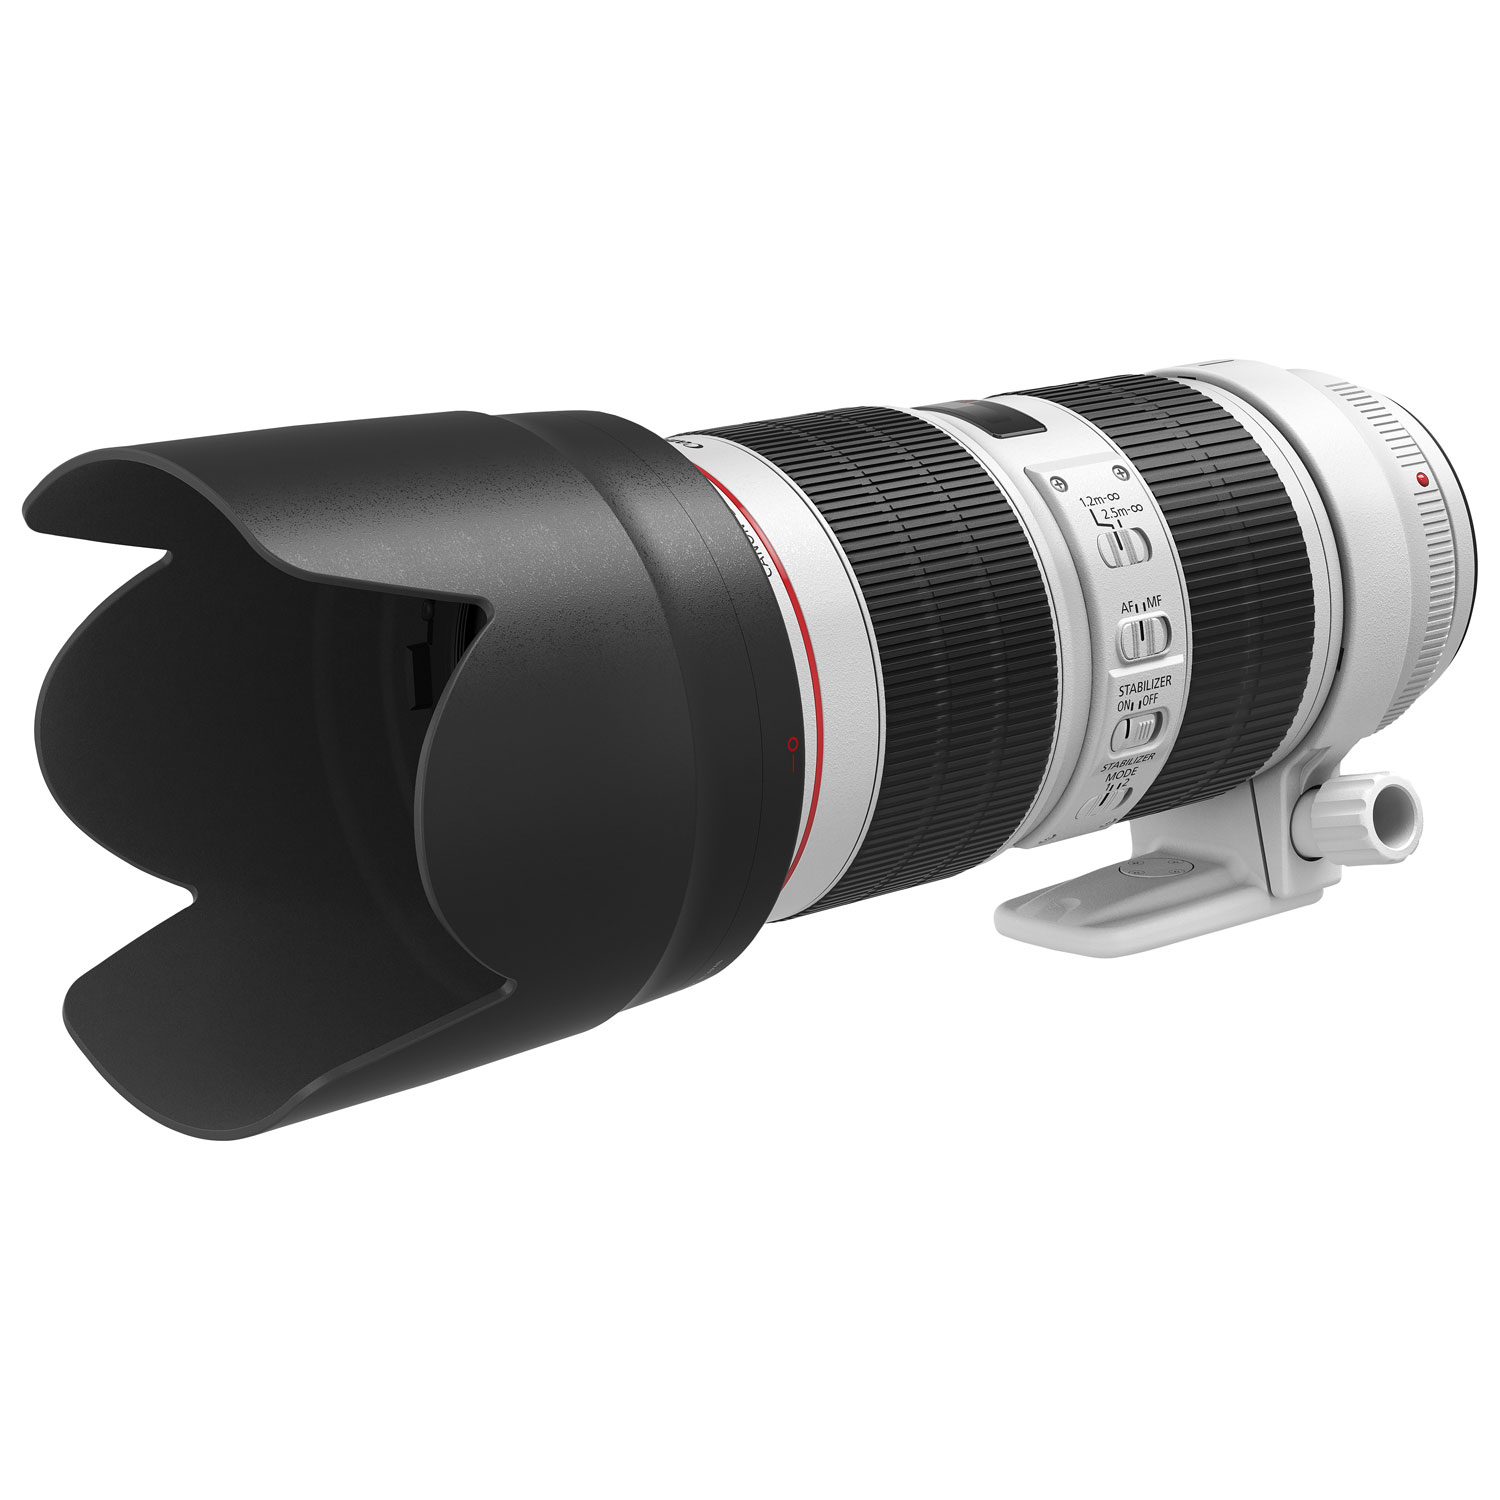 Canon EF 70-200mm f/2.8L IS III USM Lens | Best Buy Canada